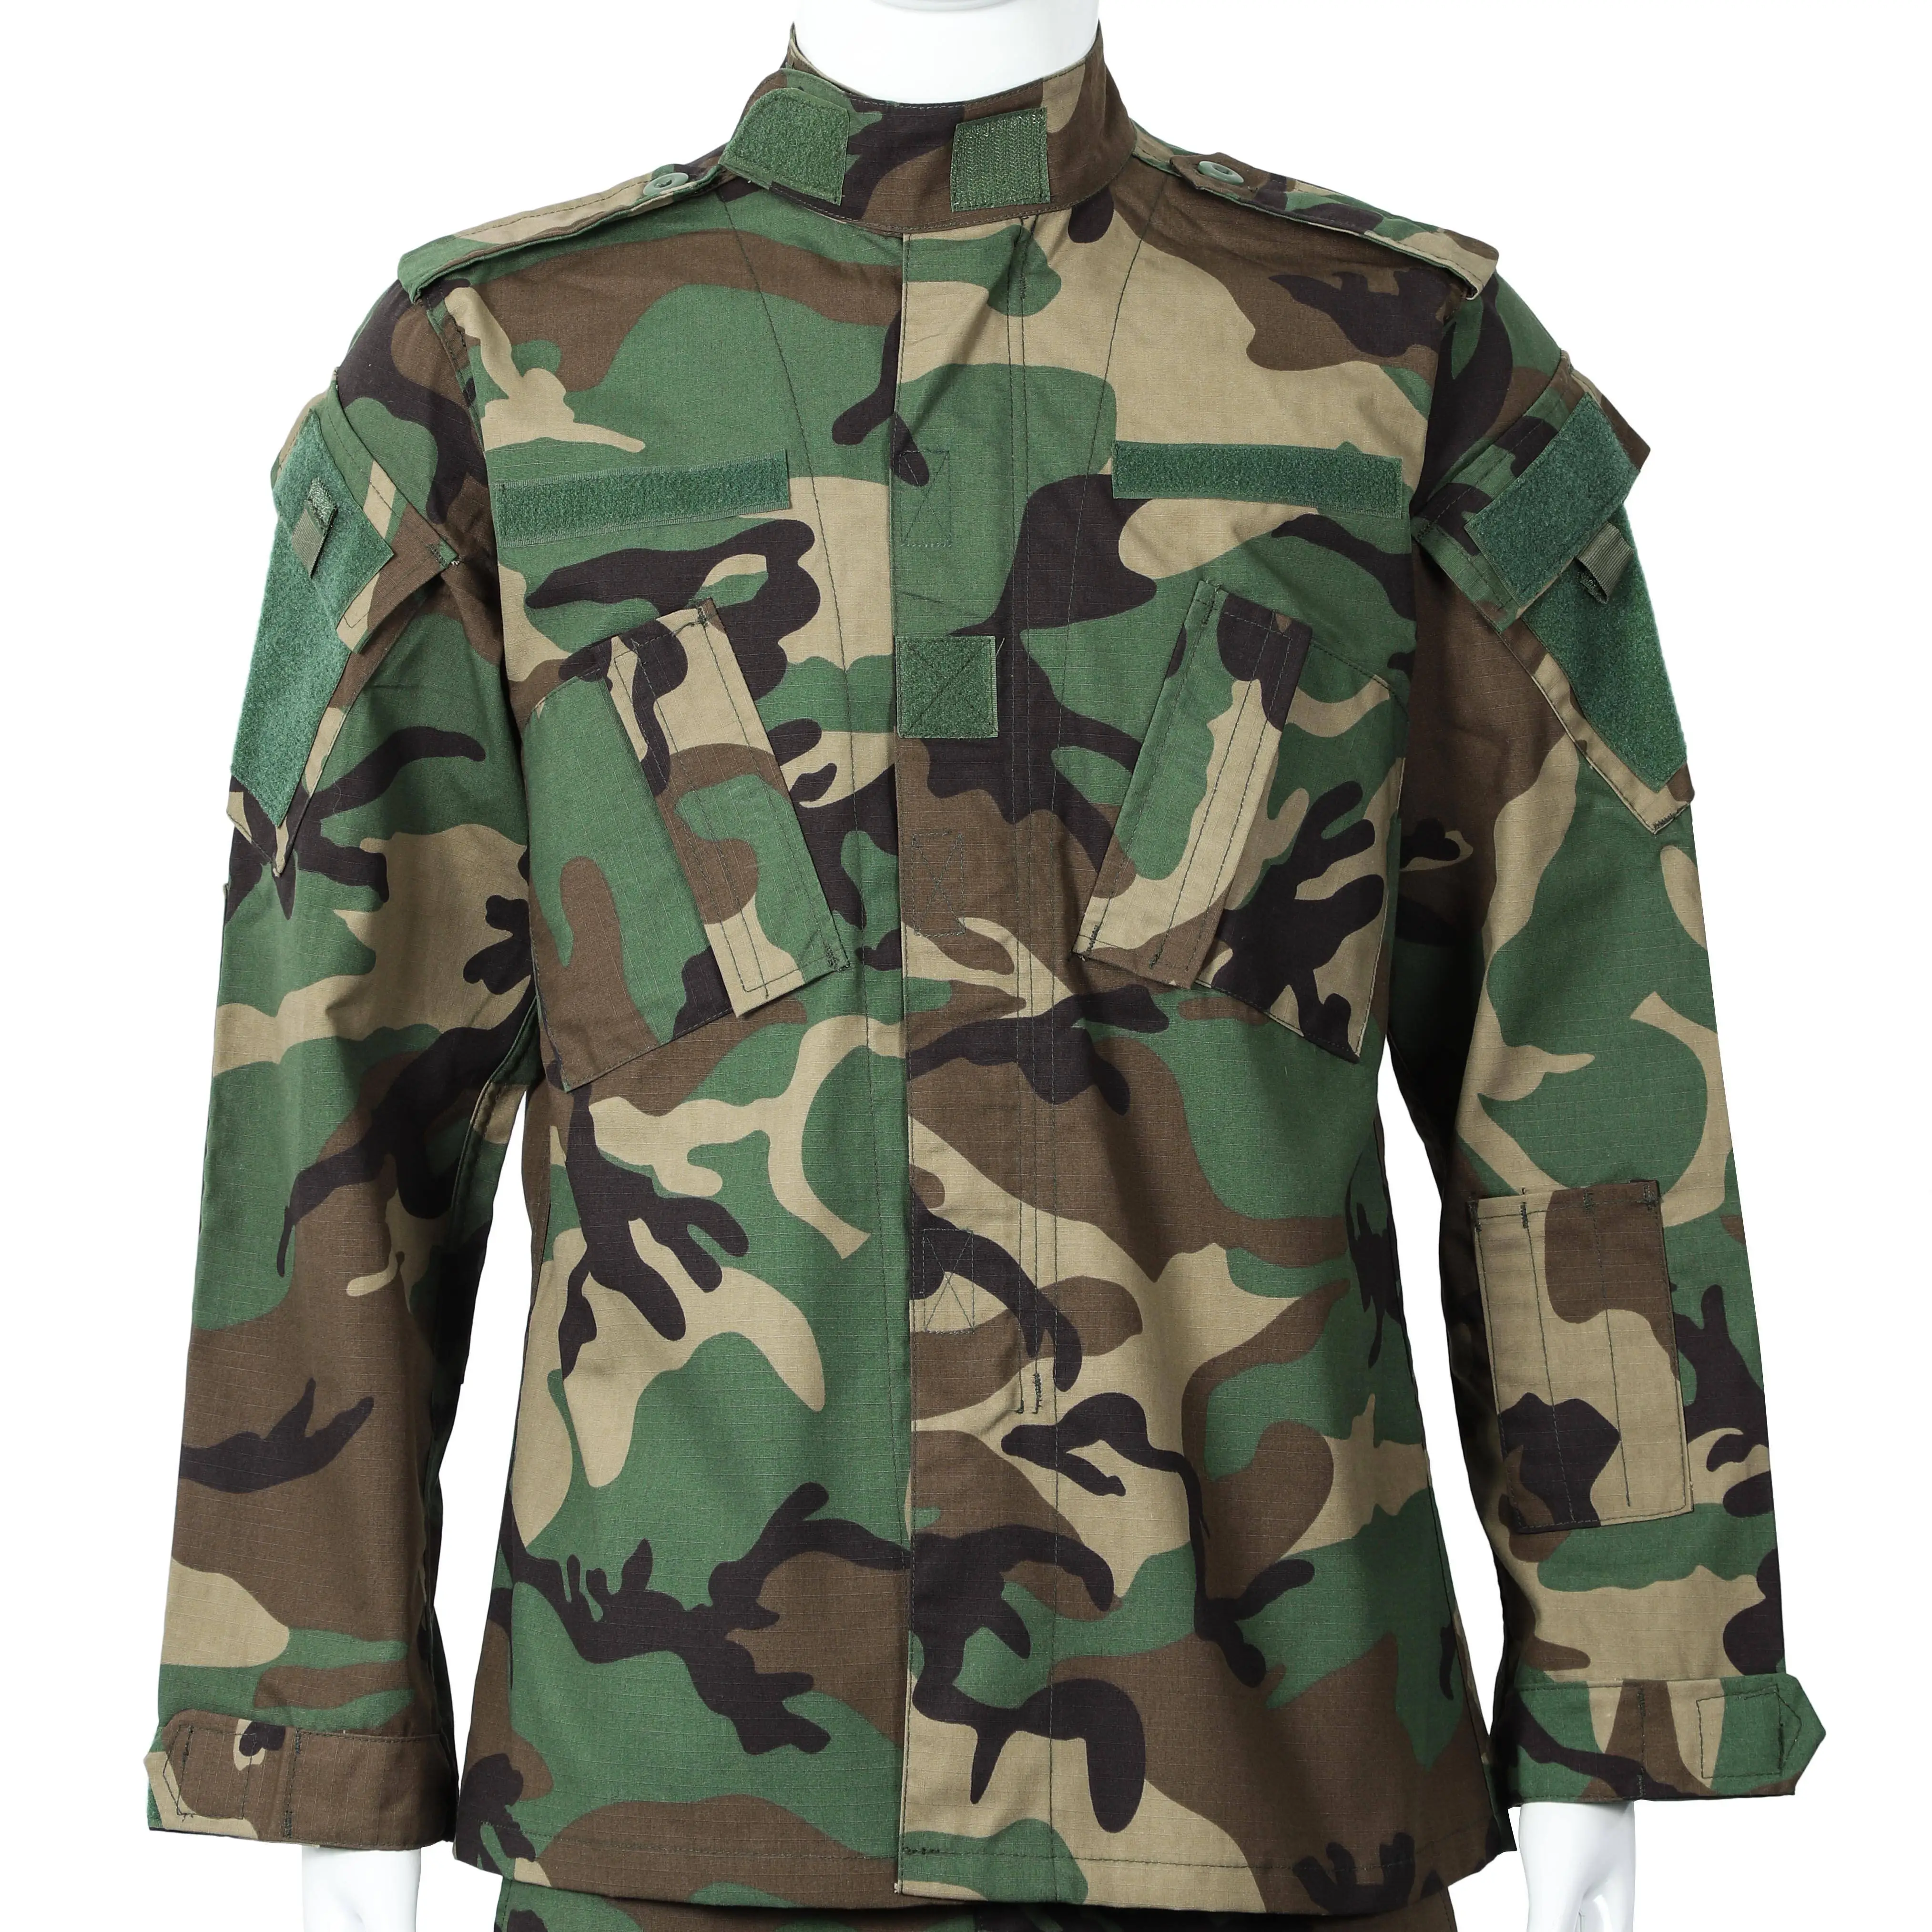 Pengda OEM Factory Durable Wild Camping Tactical Fatigue Russia Digital Camouflage Uniform